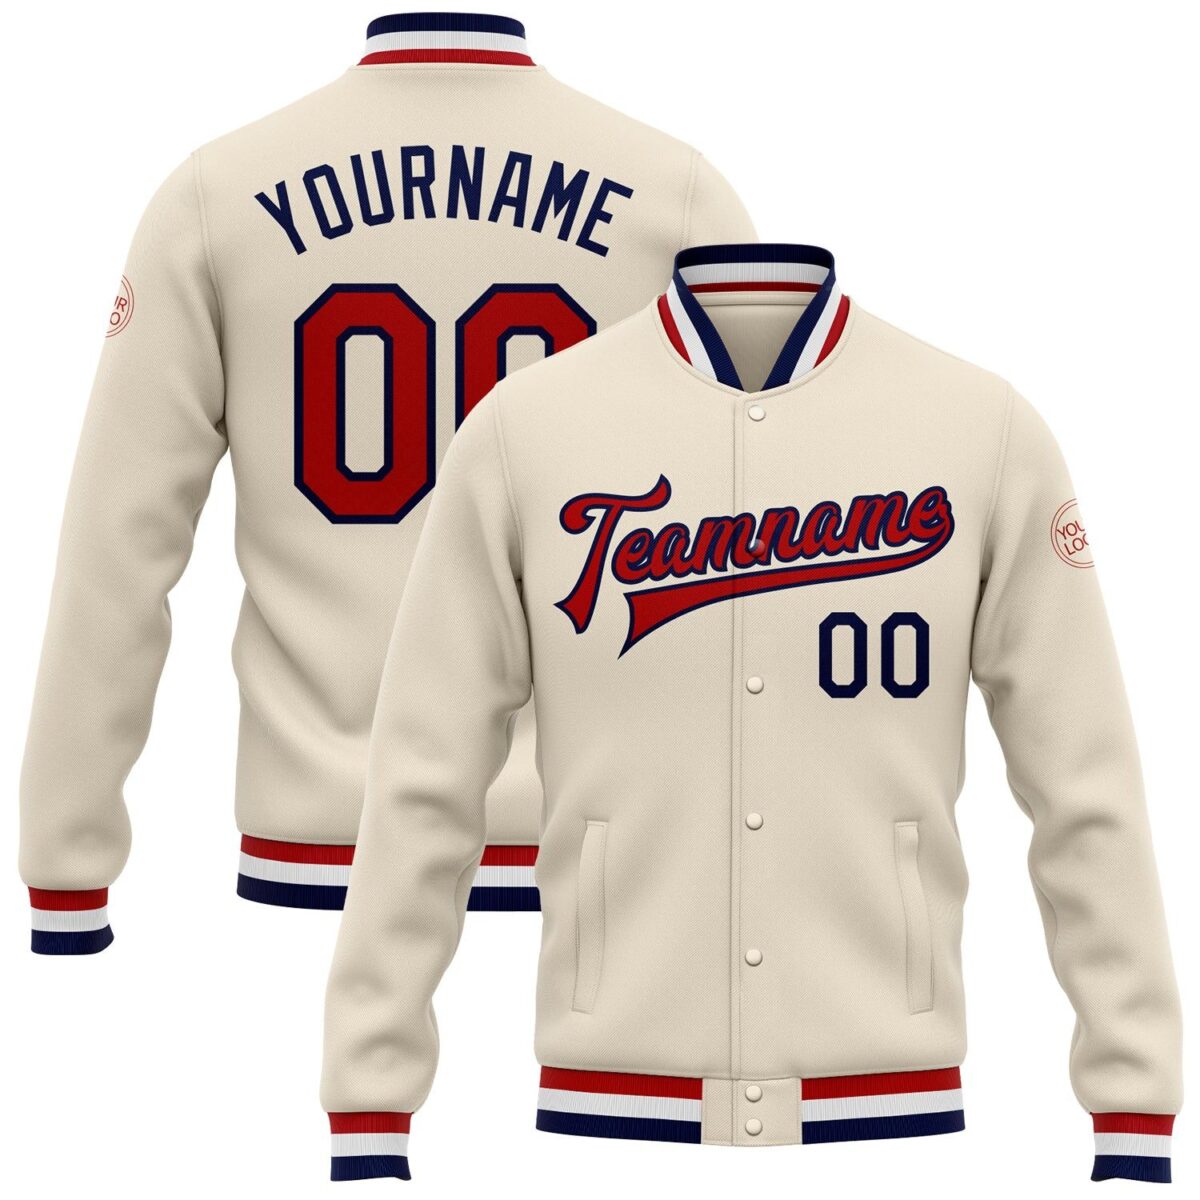 College Student Baseball Jackets with Cream & Red 1